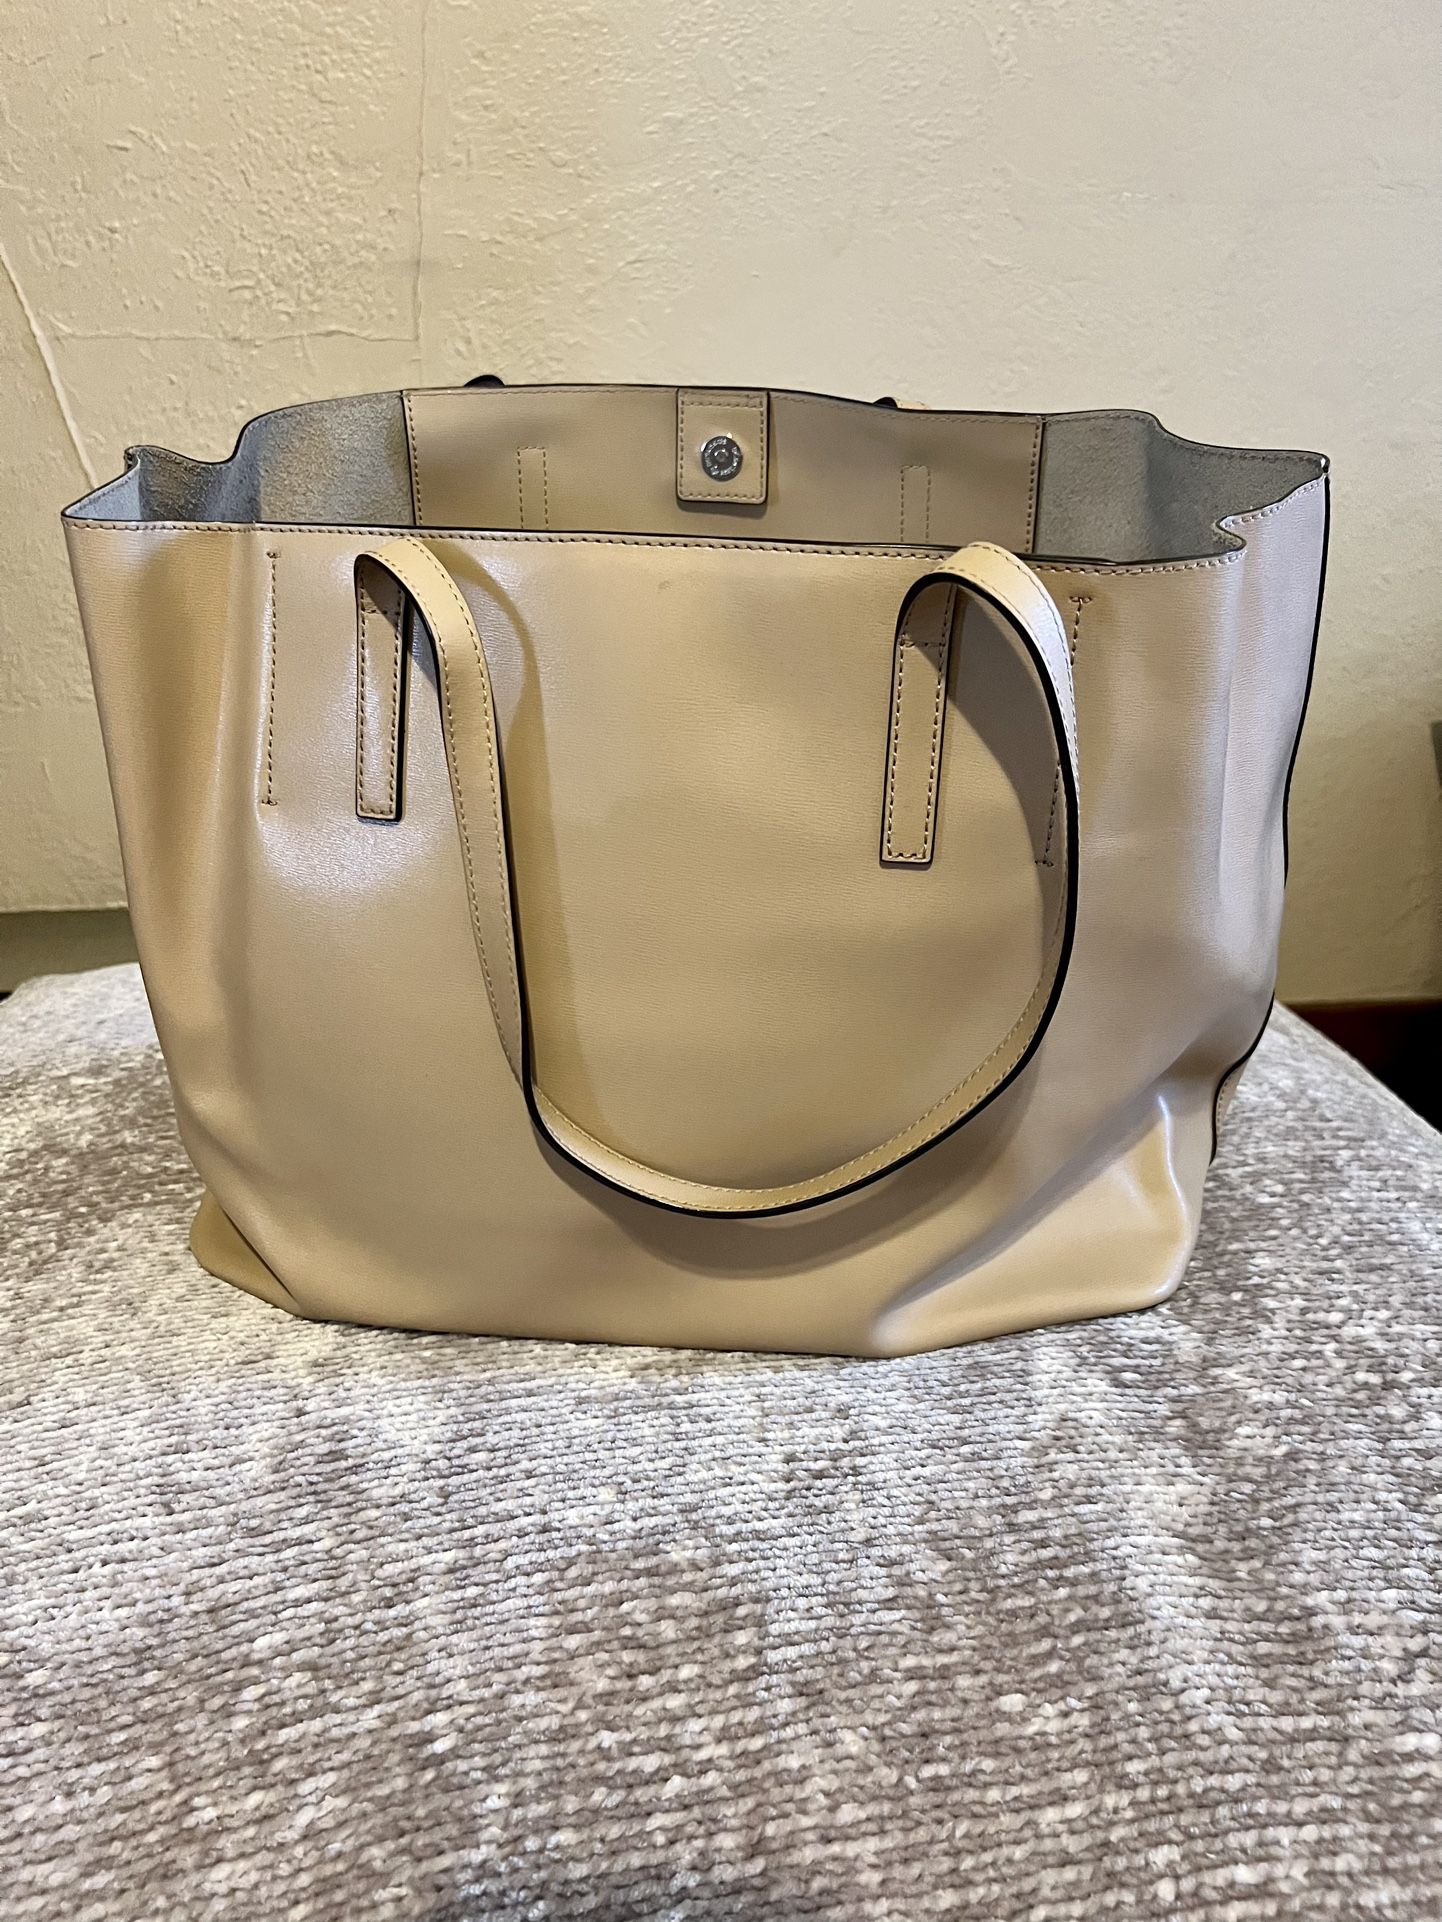 Mercer Large Pebbled Leather Accordion Tote for Sale in San Jose, CA -  OfferUp